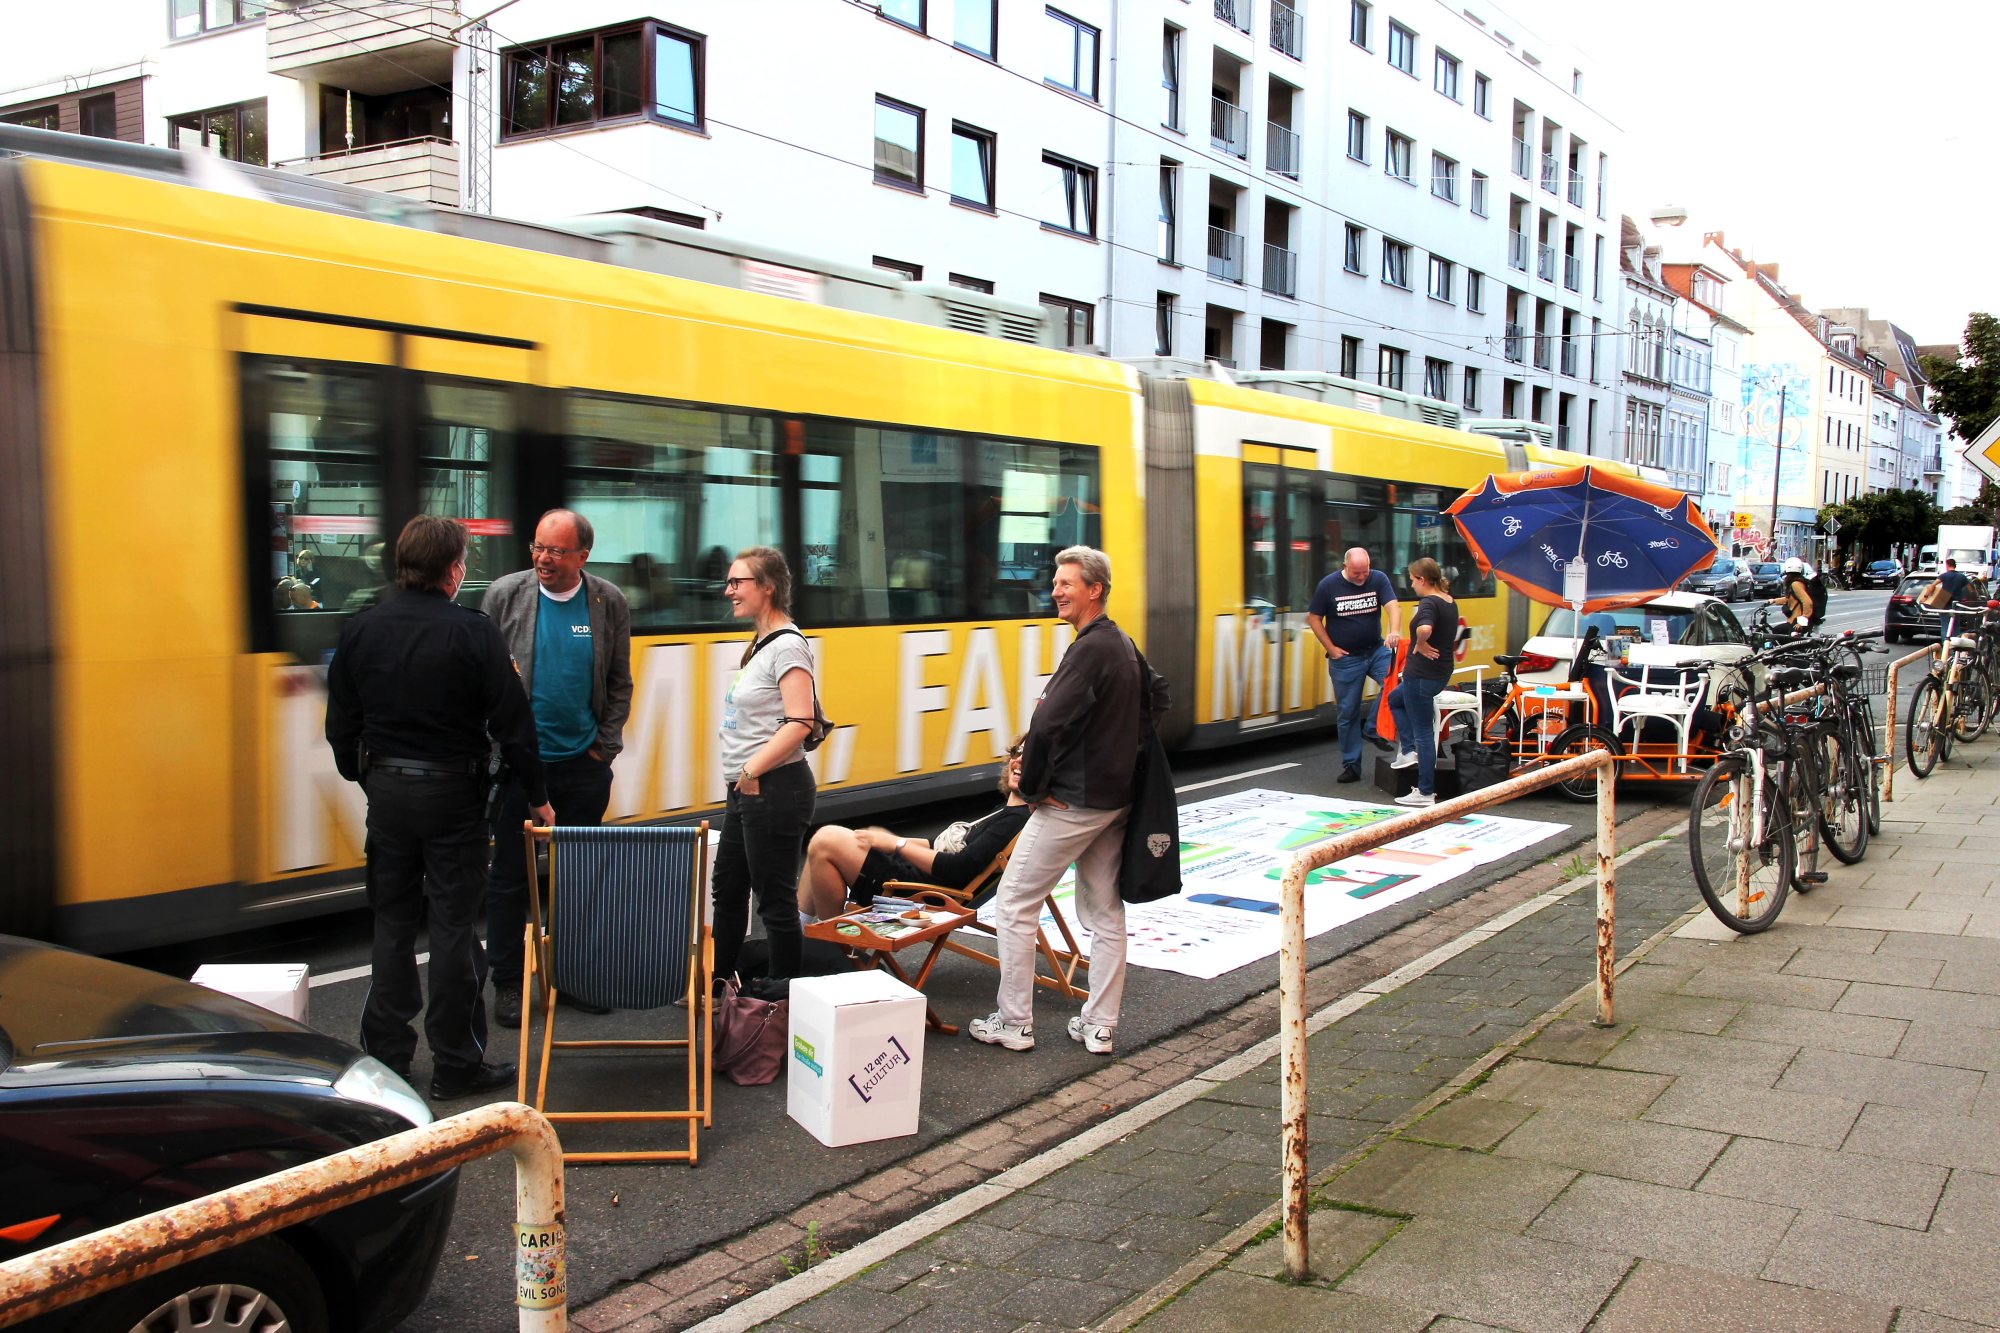 Ask me anything - PARK(ing) Day